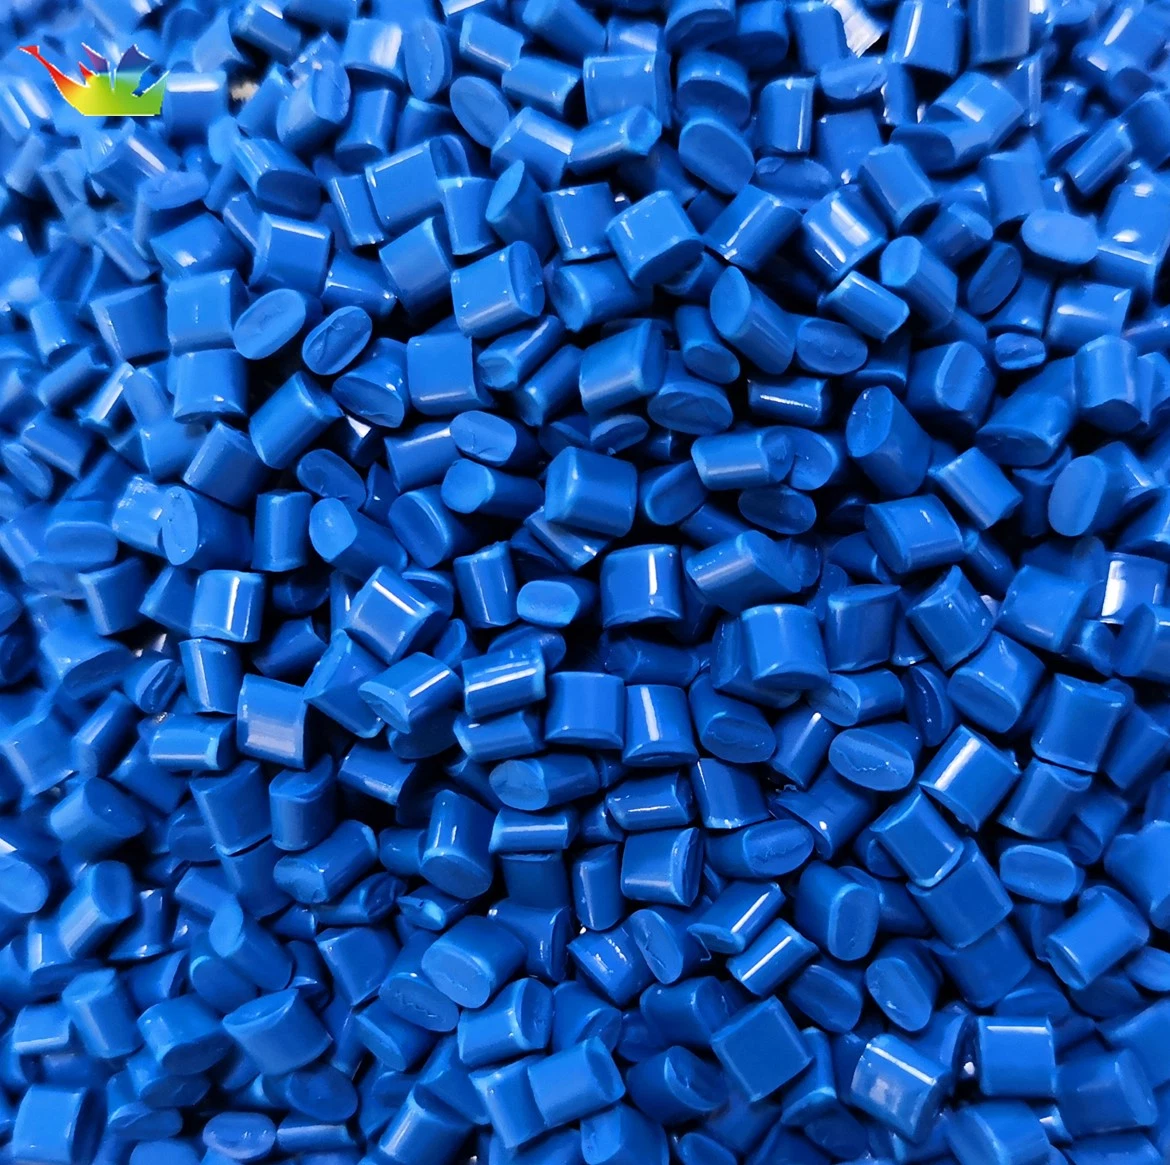 PP, ABS, PE, Pet, as, PC, Blue Masterbatch Plastic Raw Material for Household Appliance/Pipe